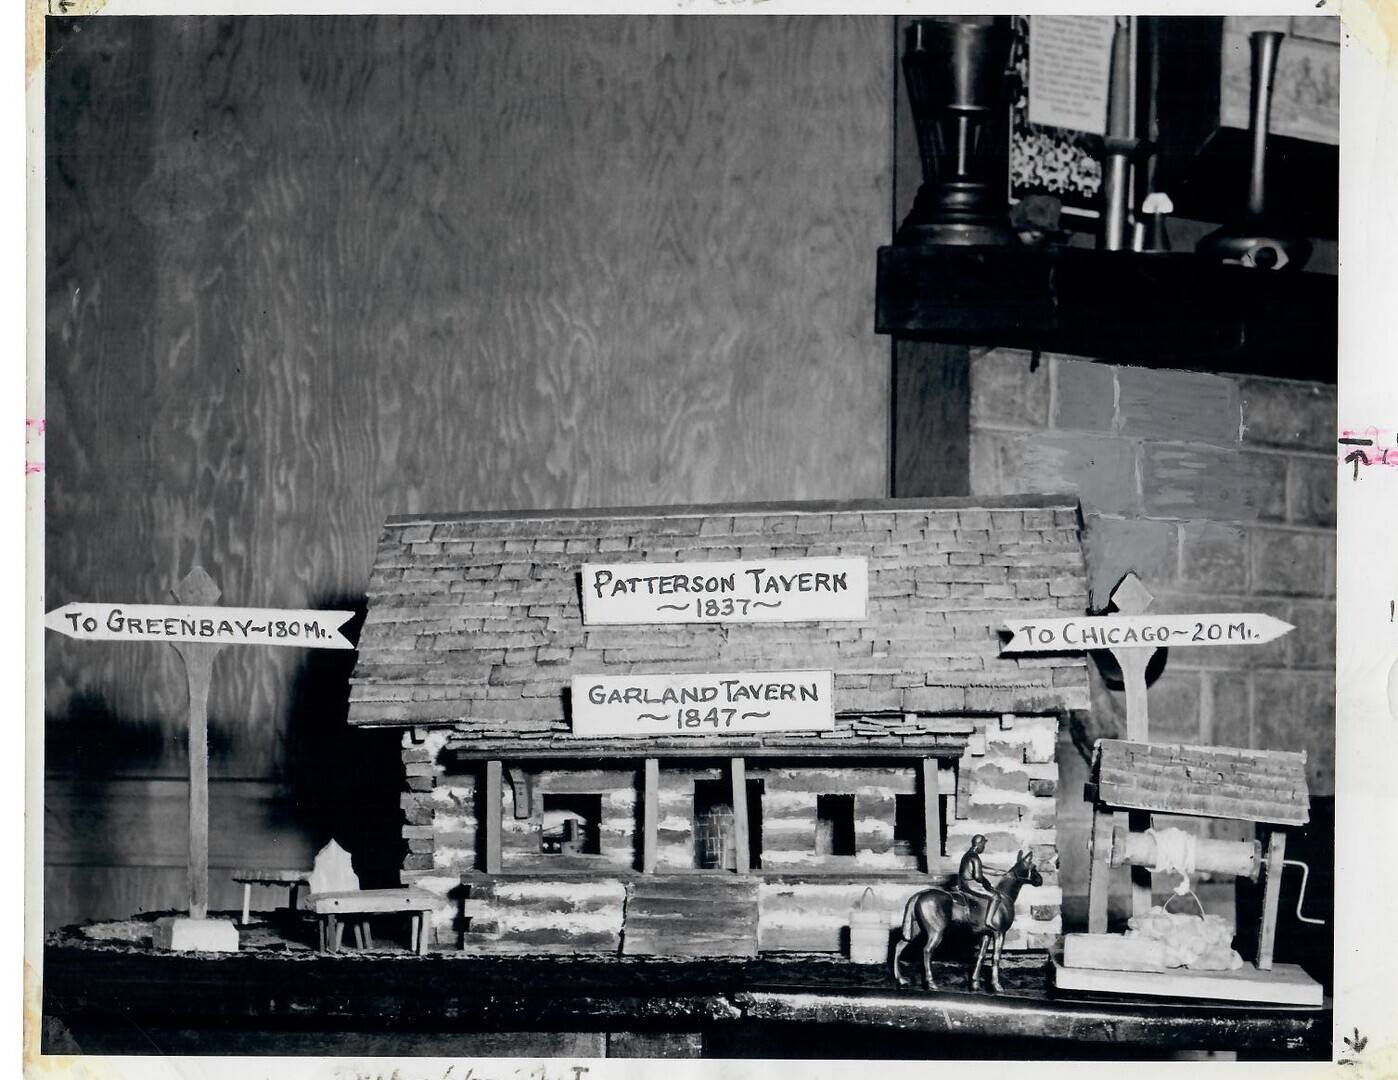 Model of Patterson Tavern